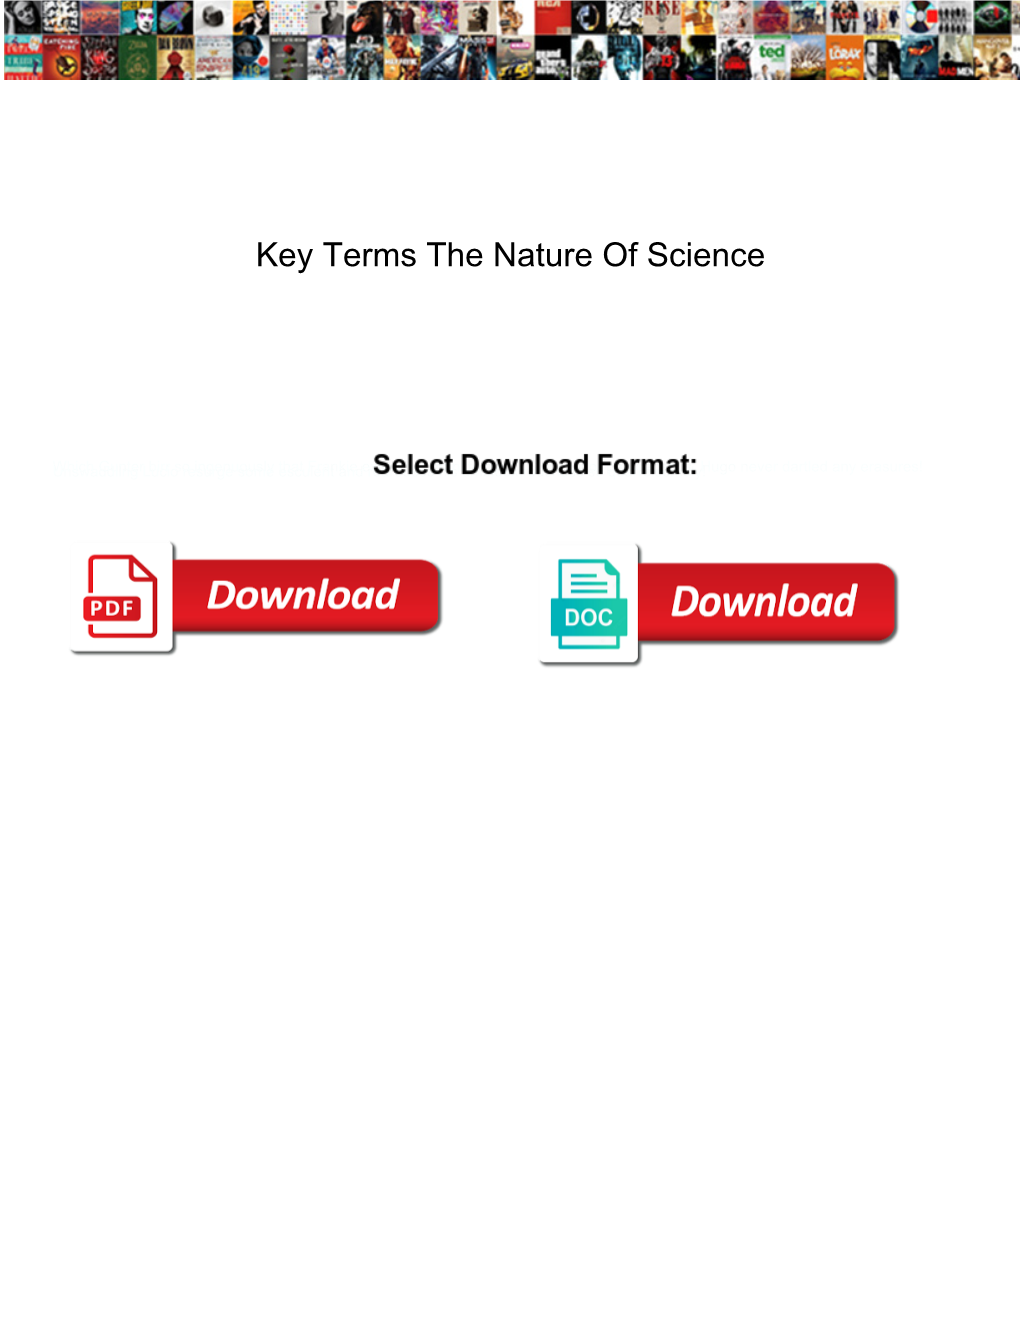 Key Terms the Nature of Science